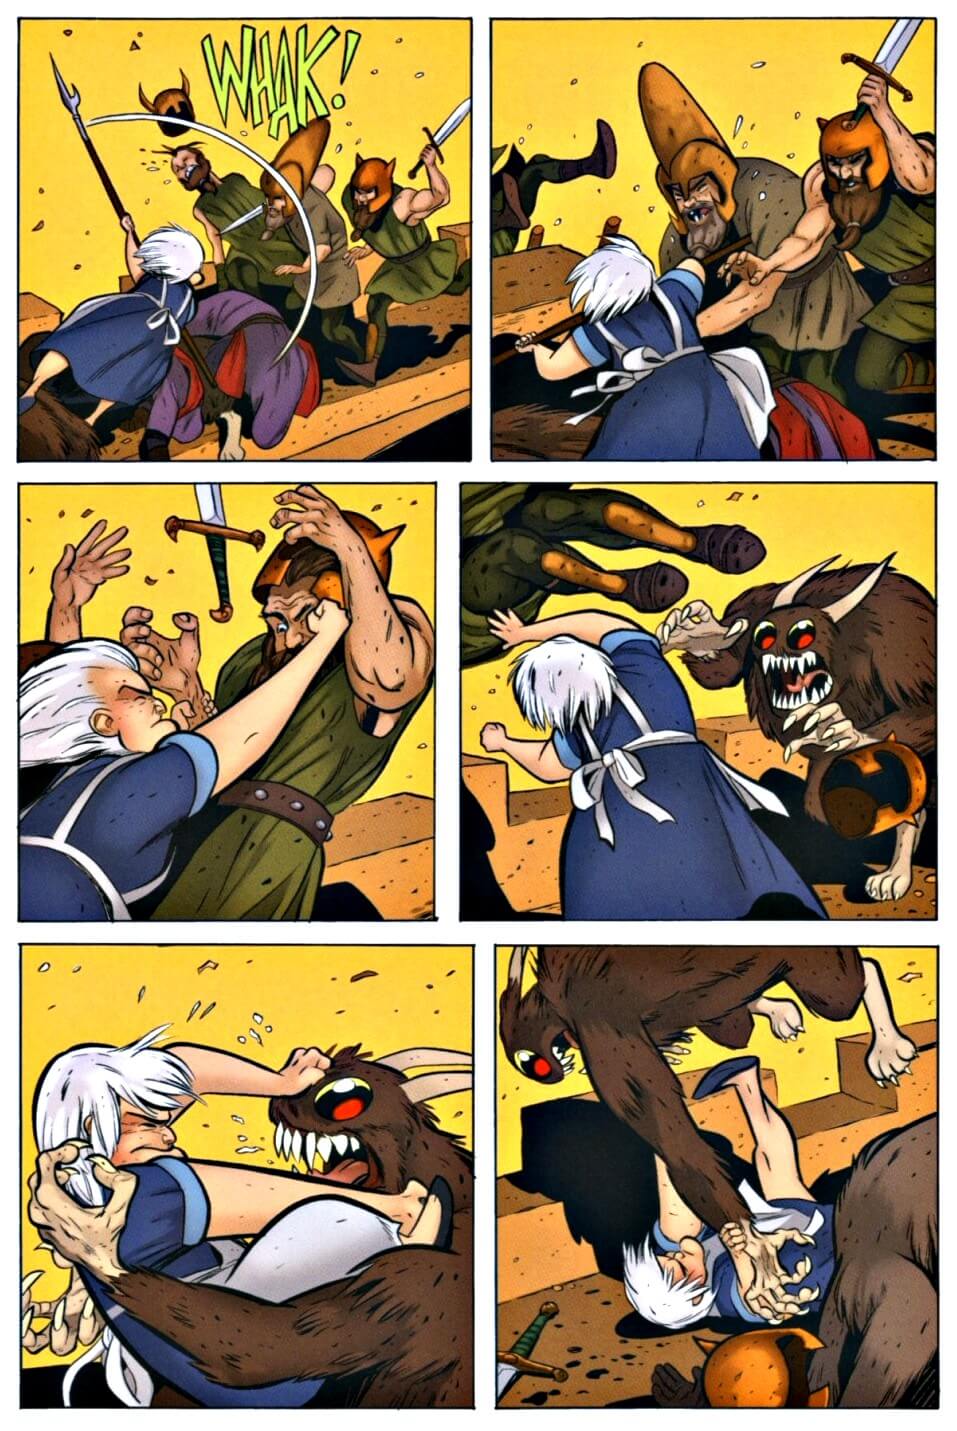 page 36 chapter 1 of bone 9 crown of horns graphic novel